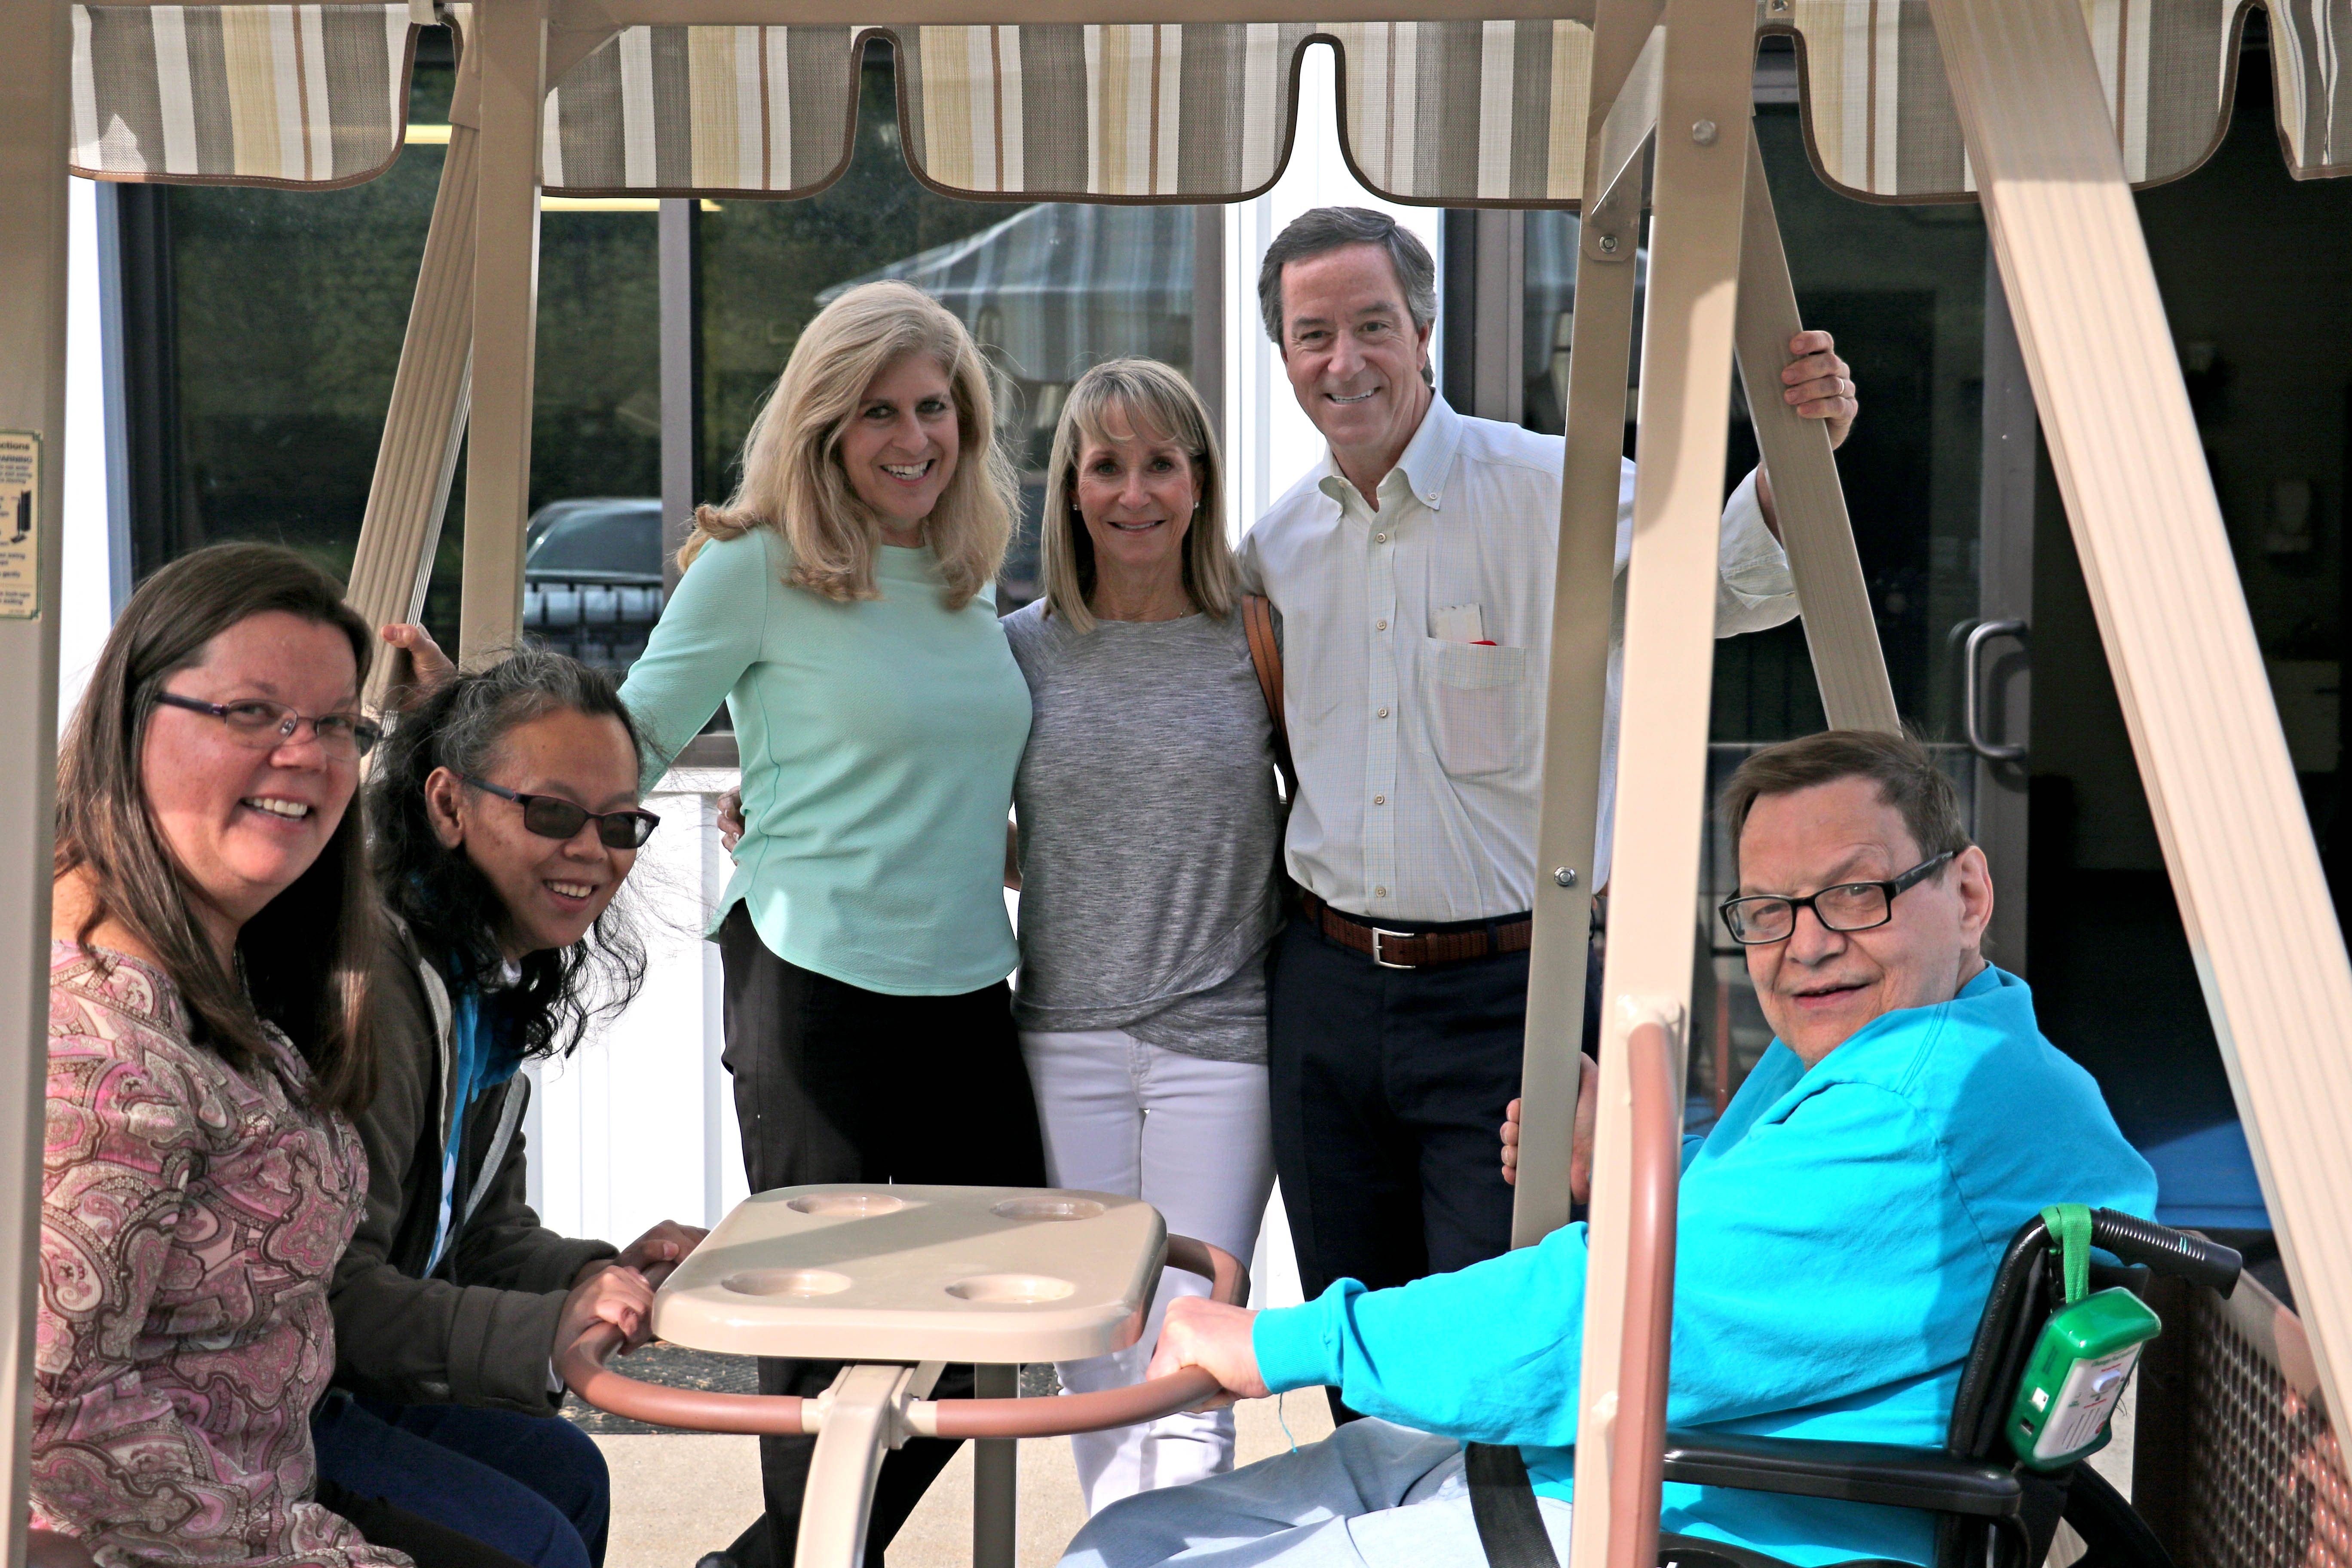 Donors of WhisperGLIDE visit ADEC to dedicate plaque on swing